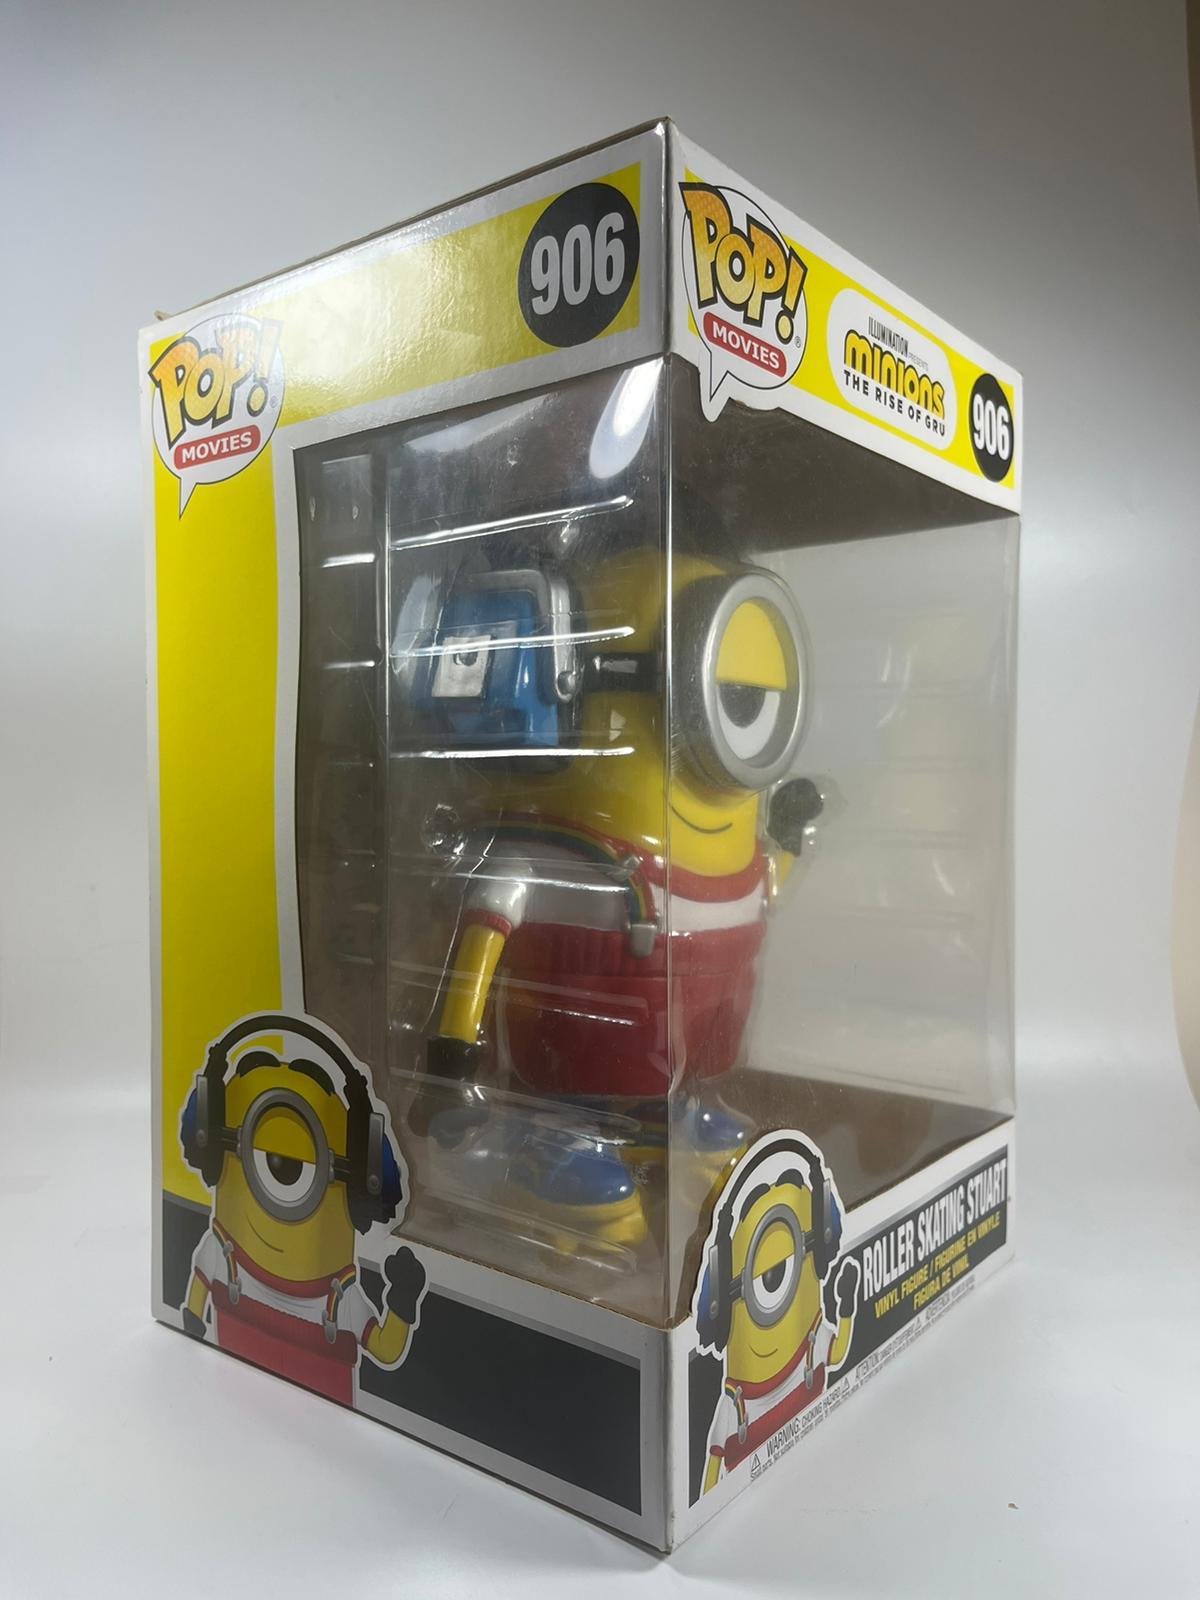 A LARGE FUNKO POP MOVIES 10" 906 MINIONS THE RISE OF GRU ROLLER SKATING STUART VINYL BOXED FIGURE - Image 2 of 5